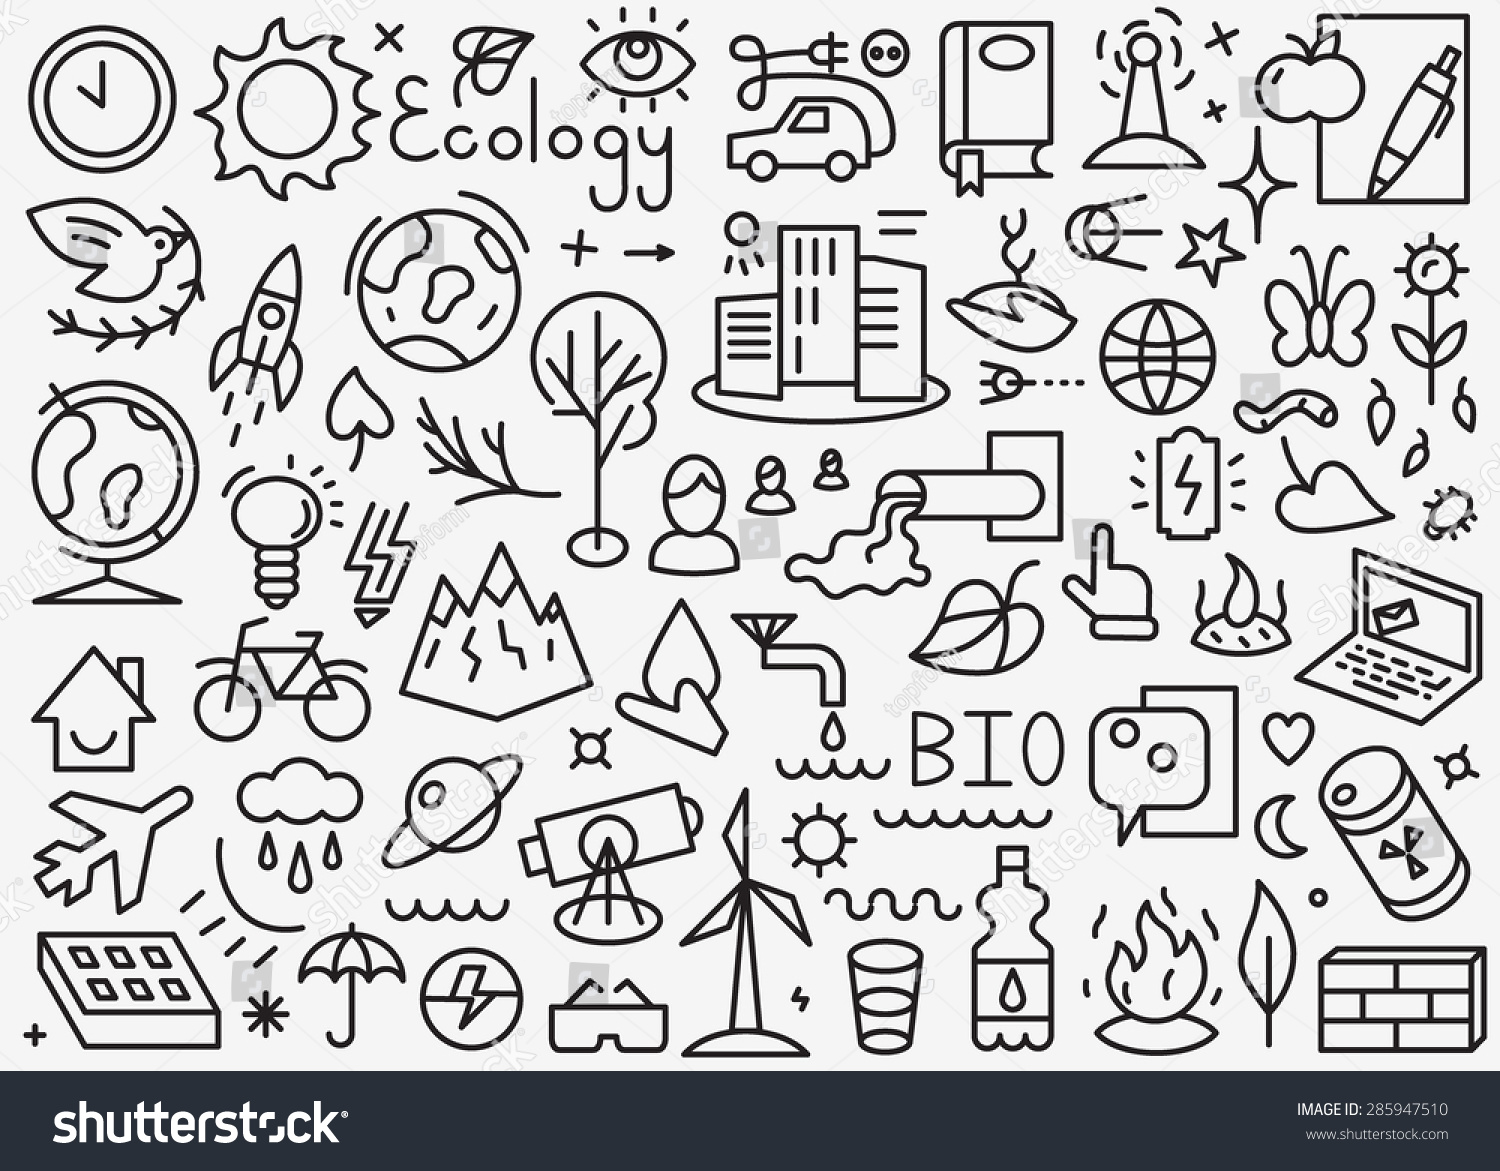 Ecology Icons Stock Vector 285947510 - Shutterstock